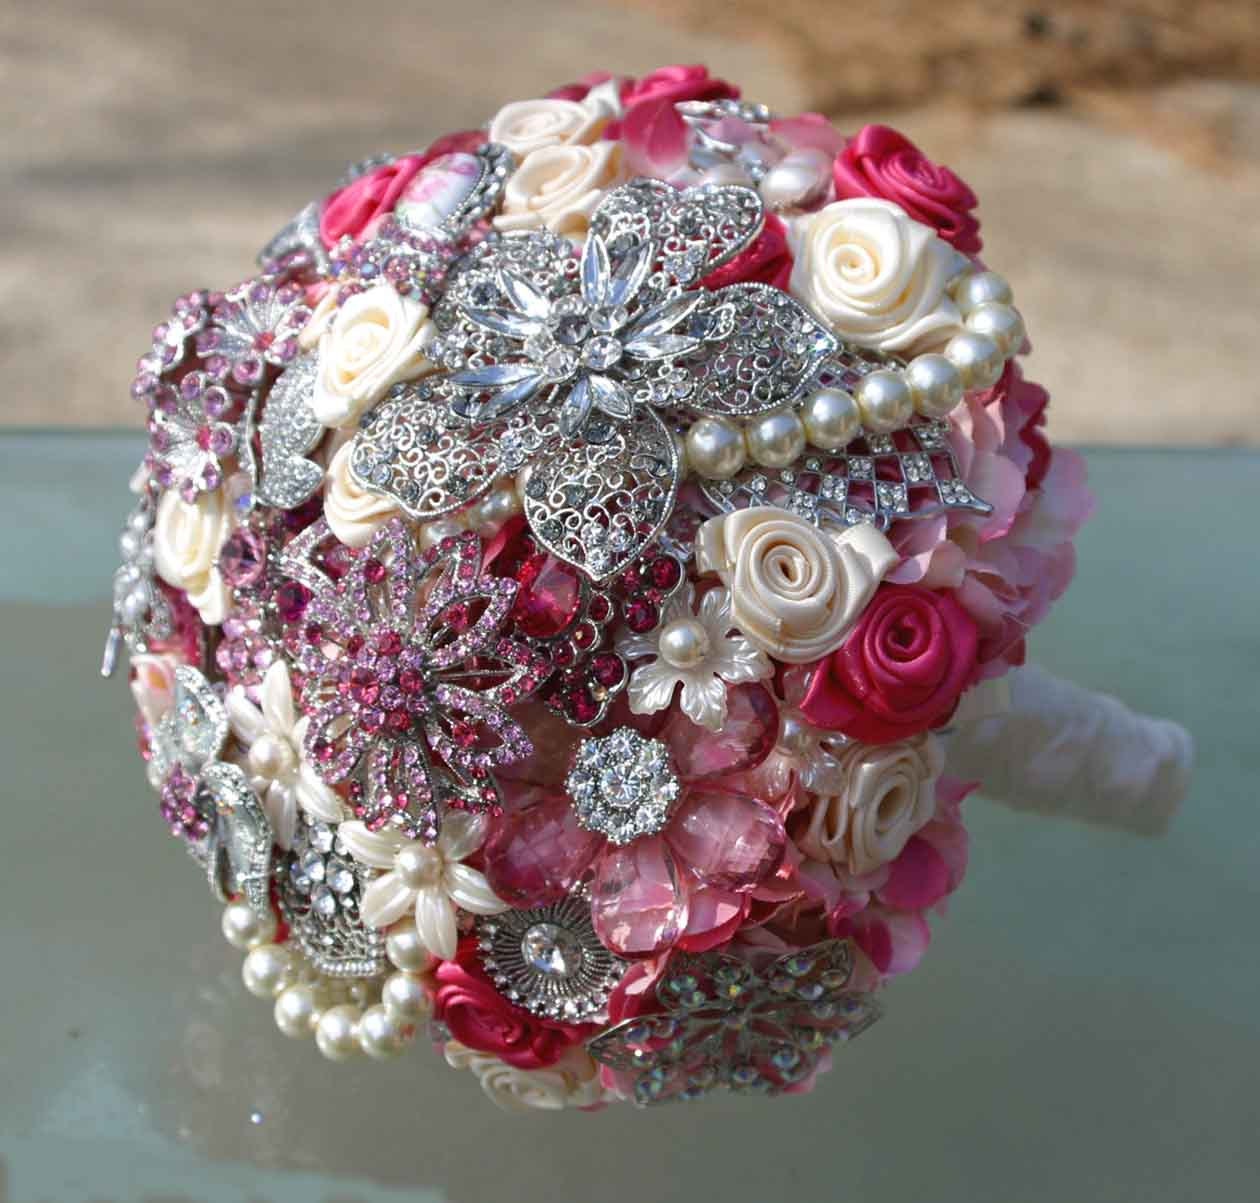 Vintage style broach pink wedding bouquet - Deposit on made to order bridal bouquet - Heirloom Bouquet